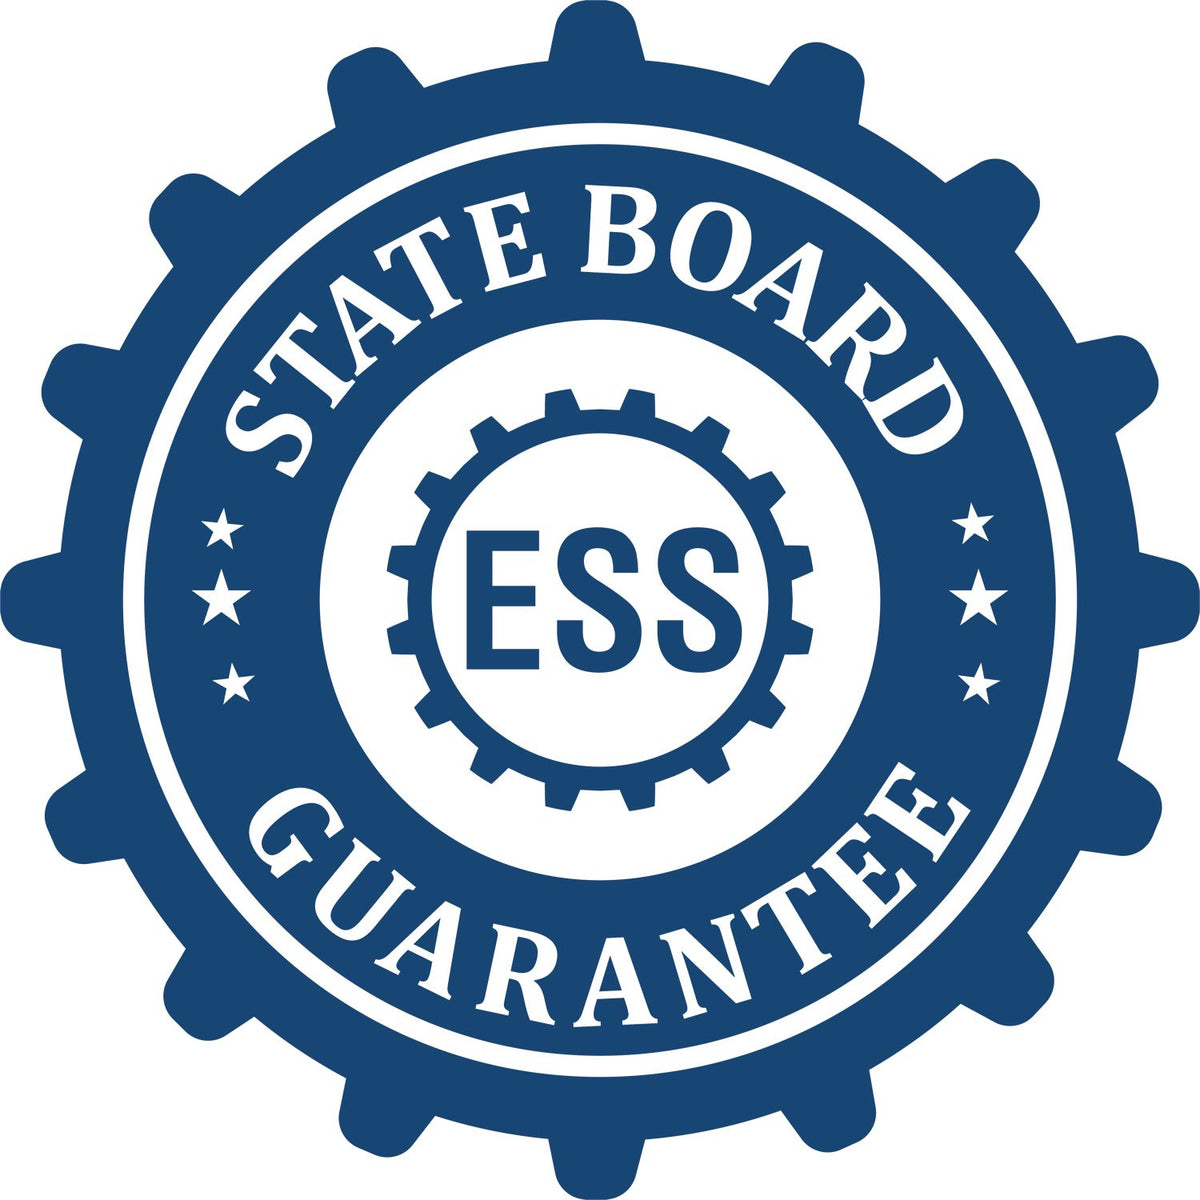 An emblem in a gear shape illustrating a state board guarantee for the Gift Arizona Architect Seal